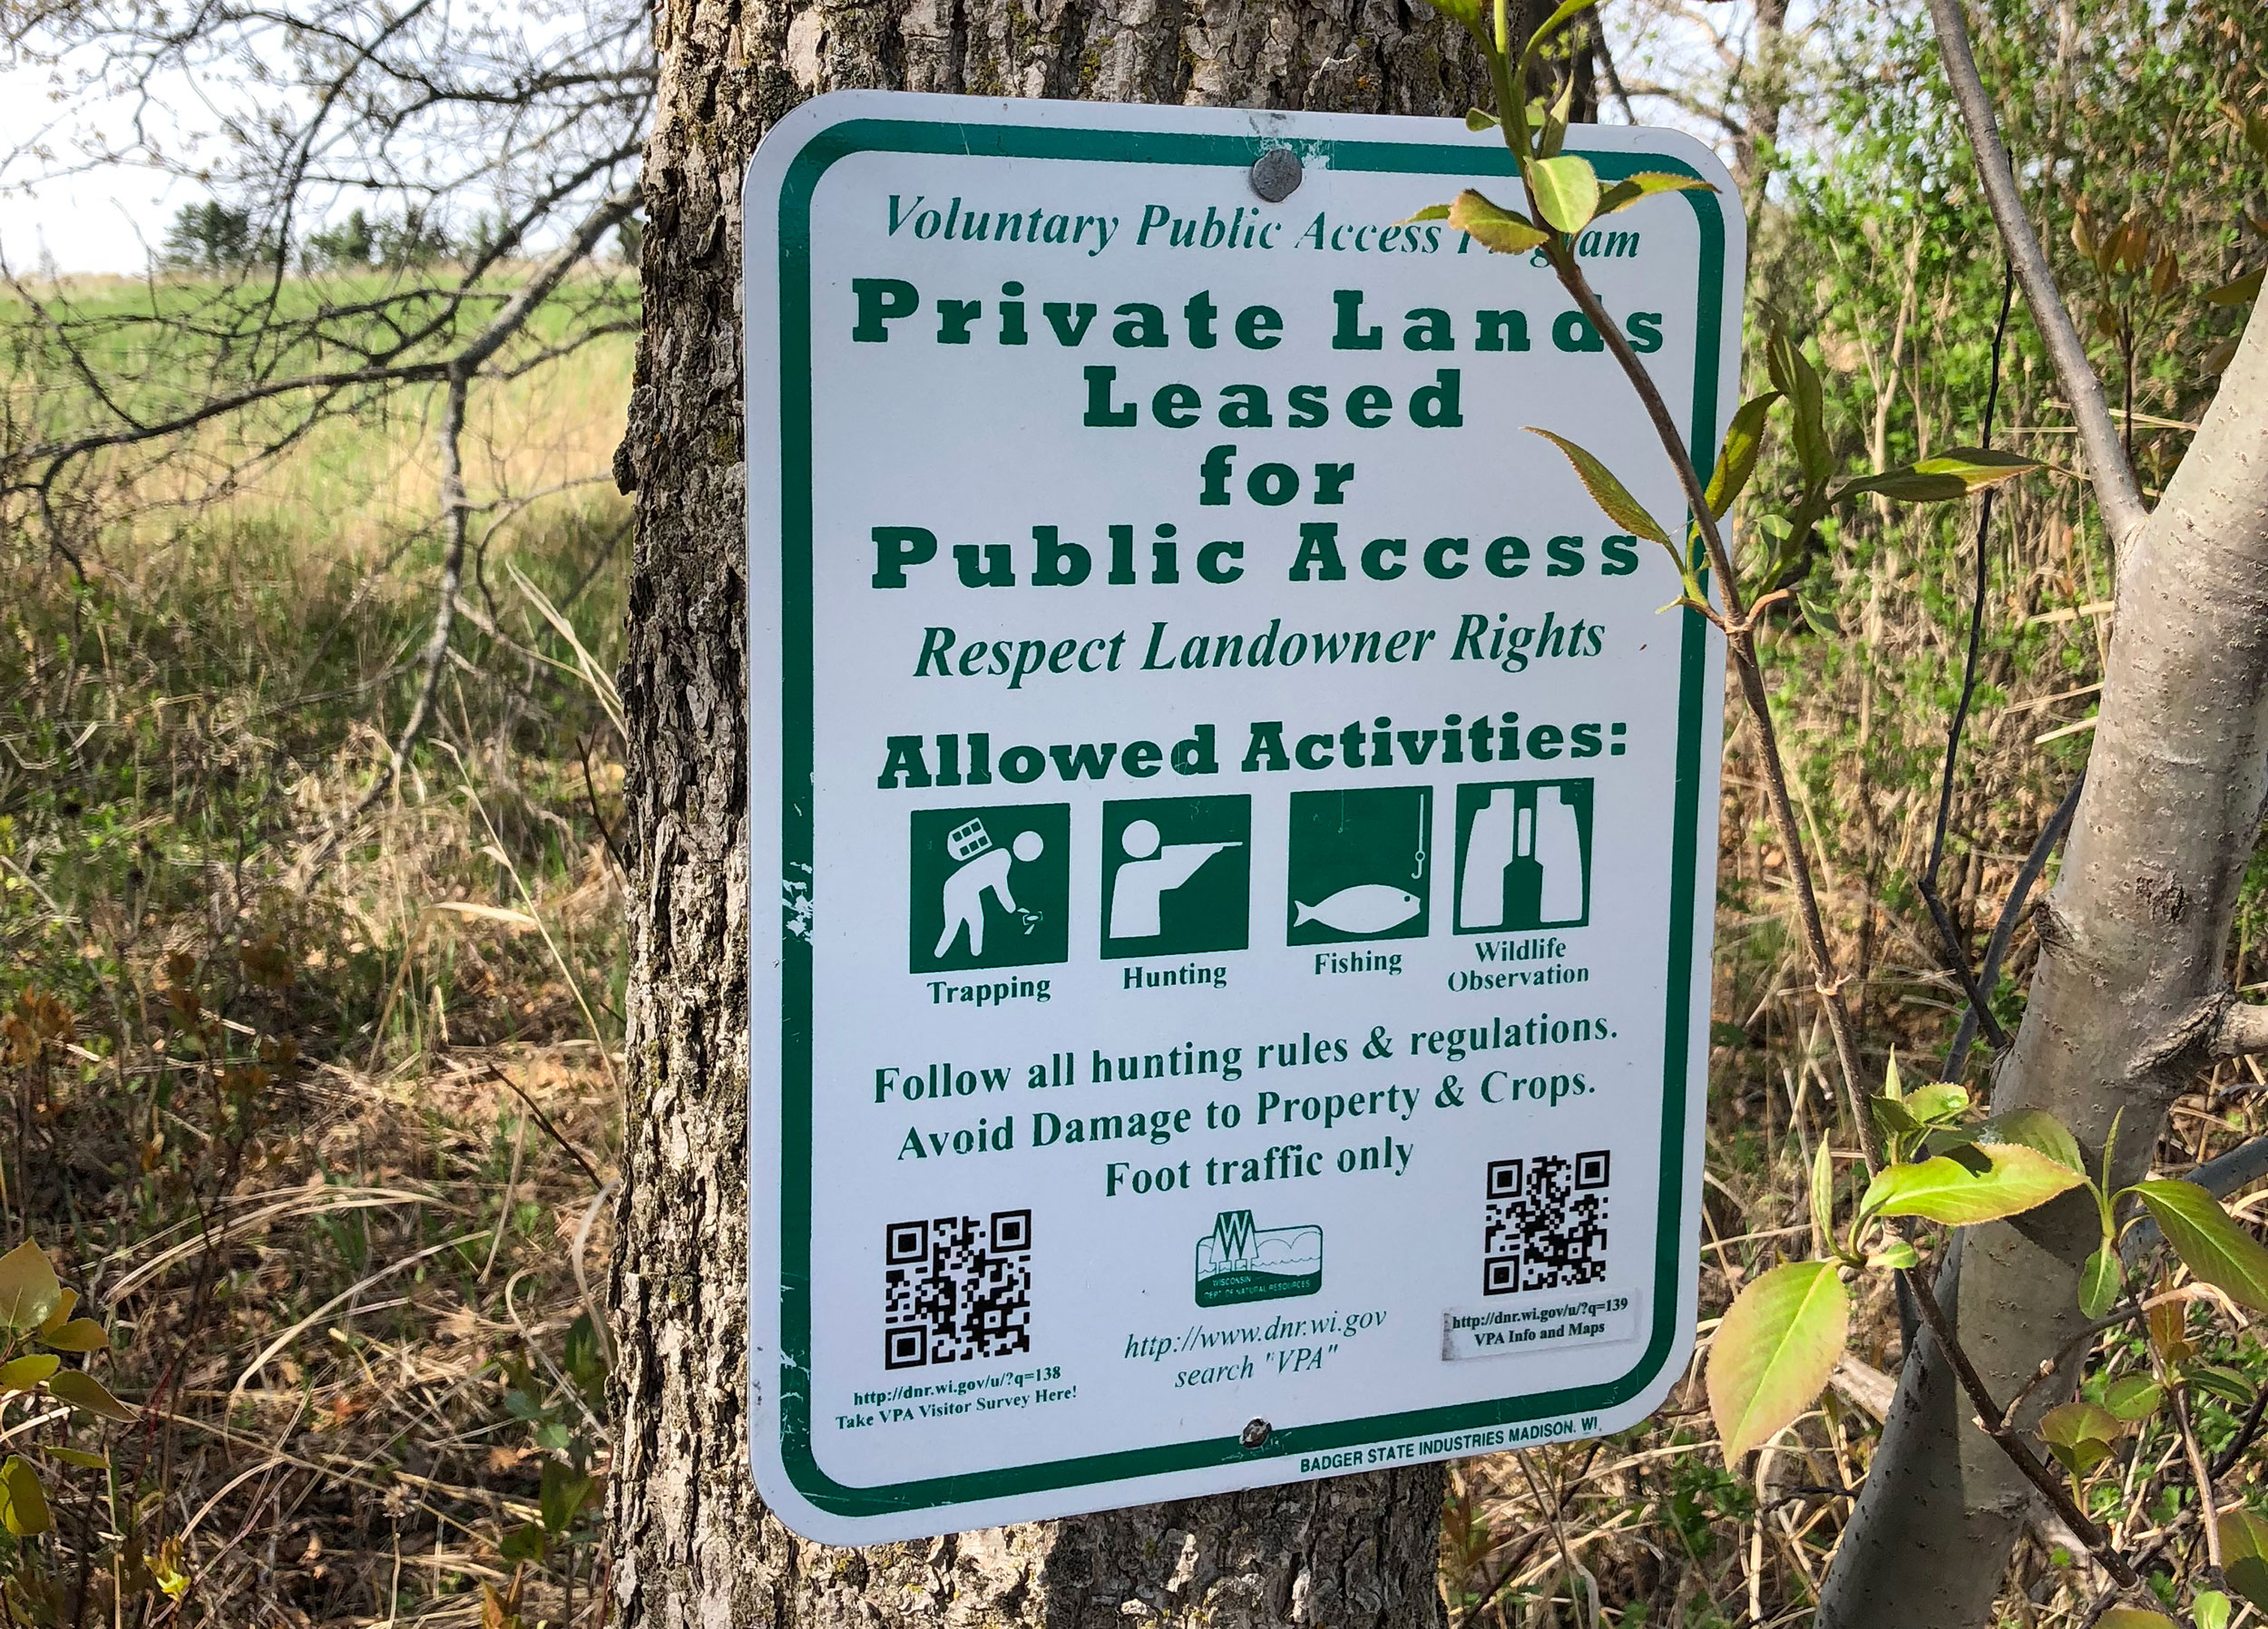 Voluntary public access allows public hunting on private land.